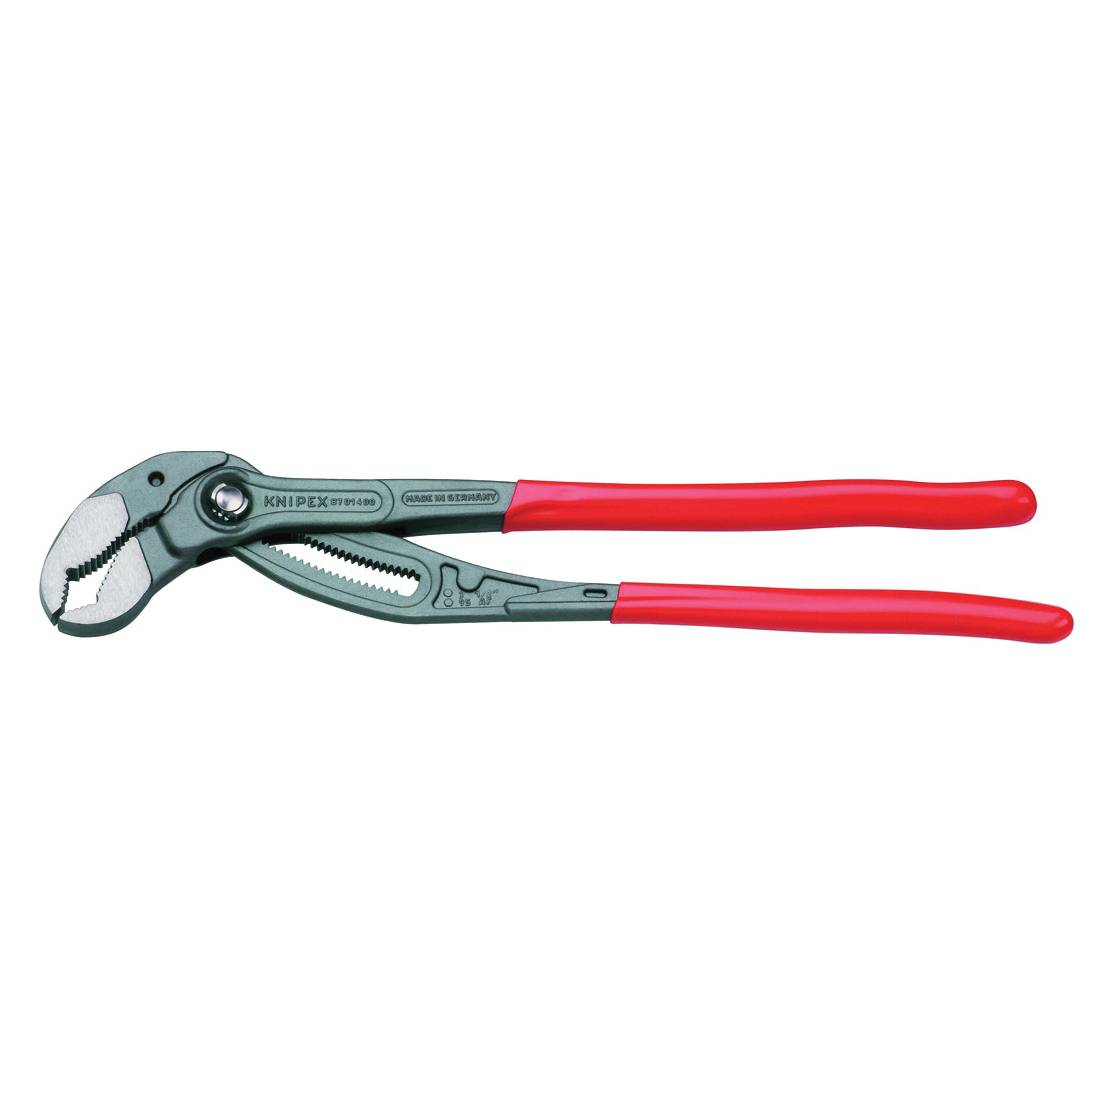 Knipex® Cobra® XL 87 01 400 SBA Box Joint Pipe Wrench and Water Pump Plier, 3-1/2 in Nominal, 2-1/16 in L x 1-3/4 in W CRV Steel V-Shape Jaw, Serrated Jaw Surface, 16 in OAL